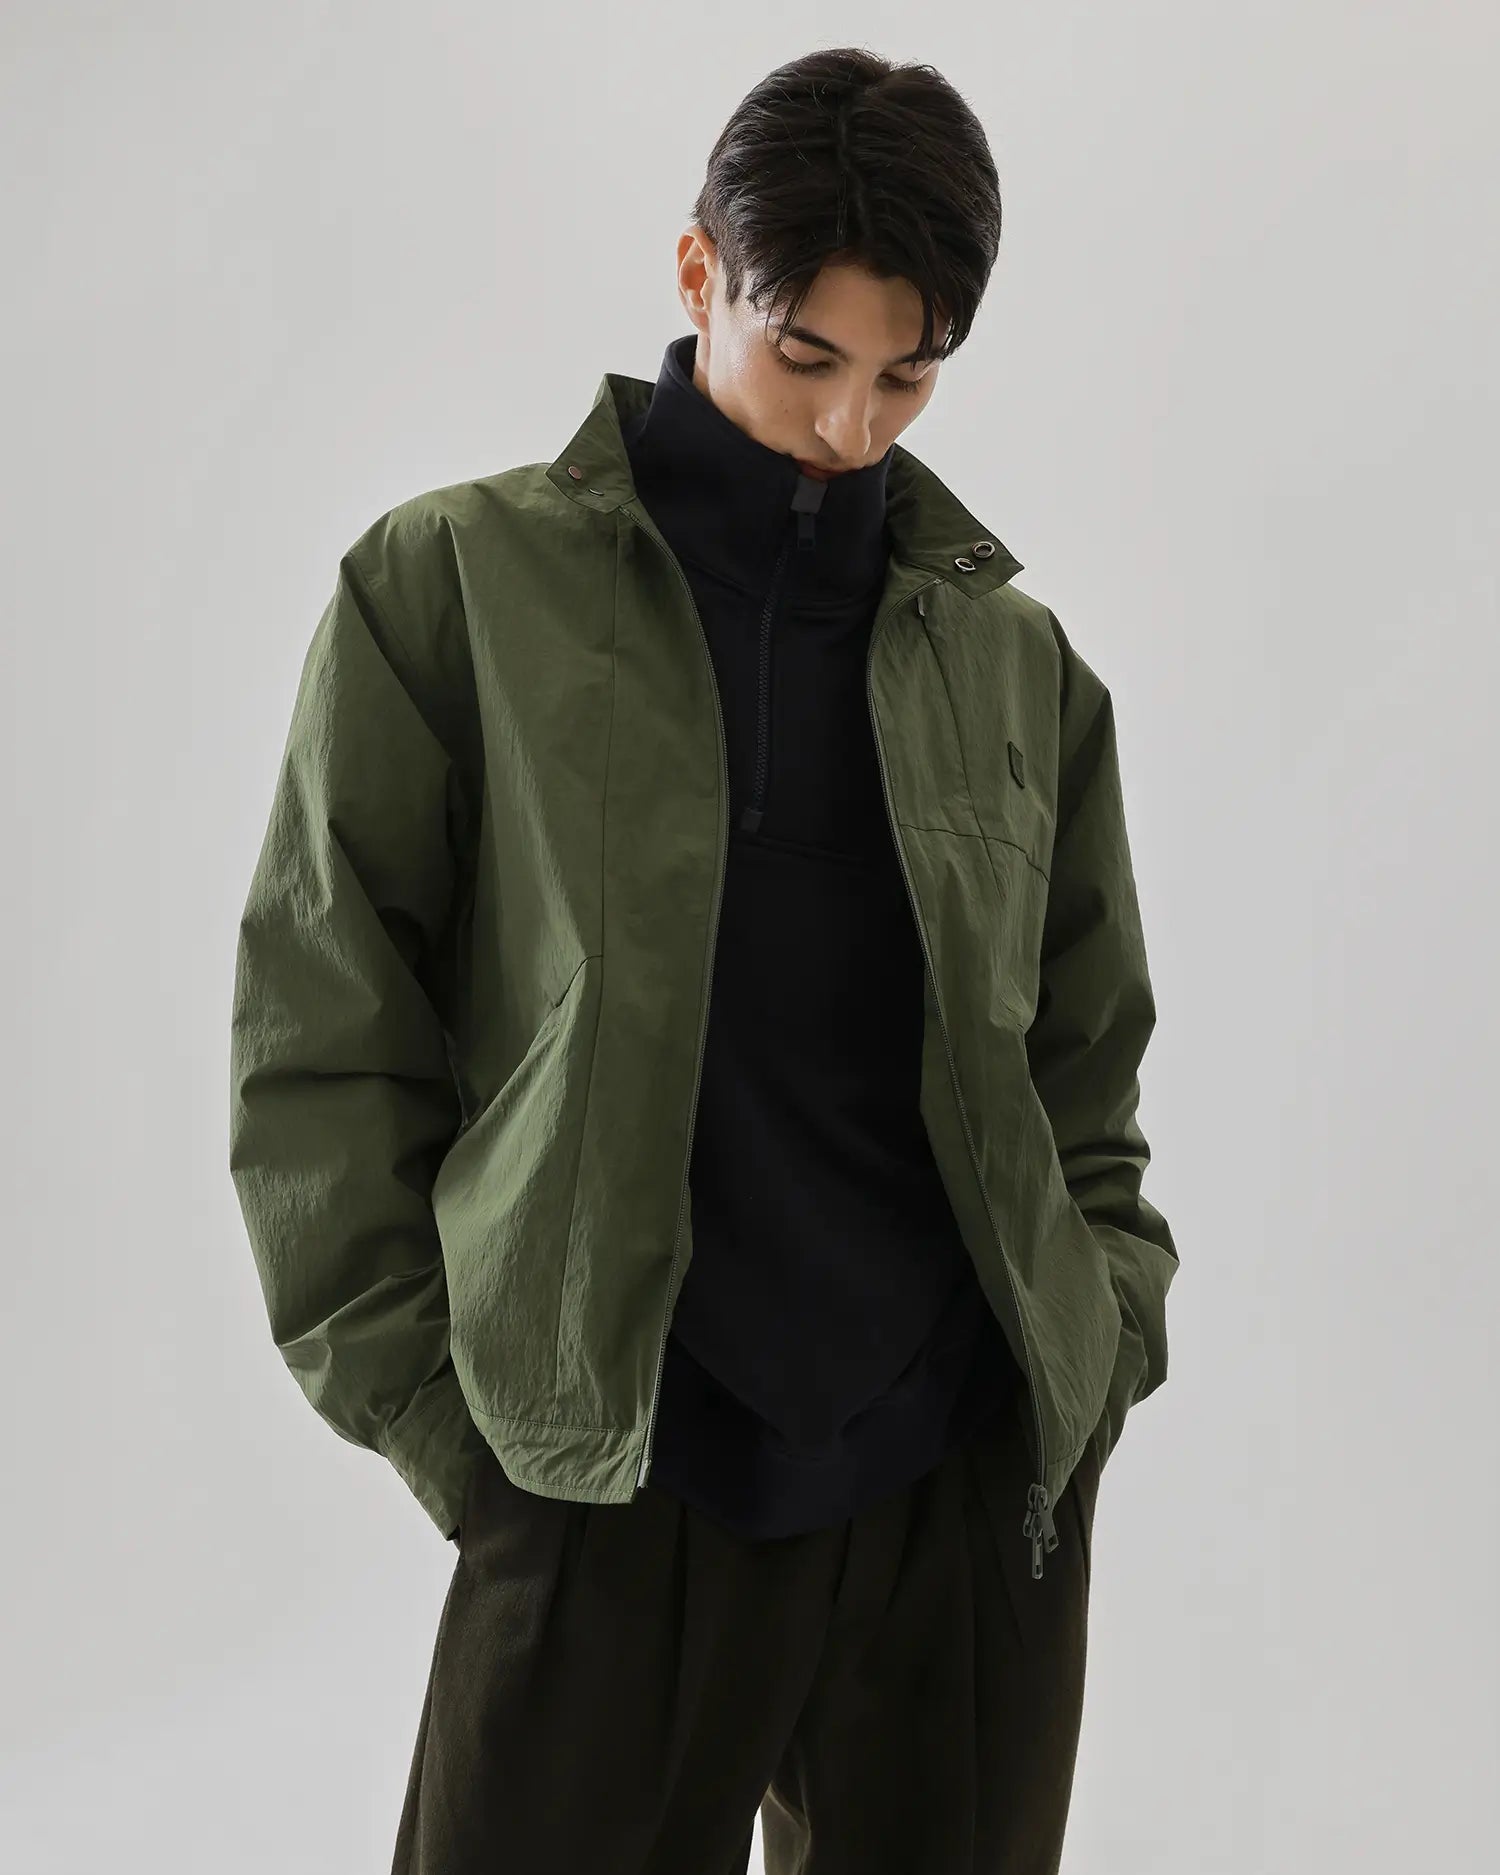 Men's Crew Jacket in Military Green 13 #military-green